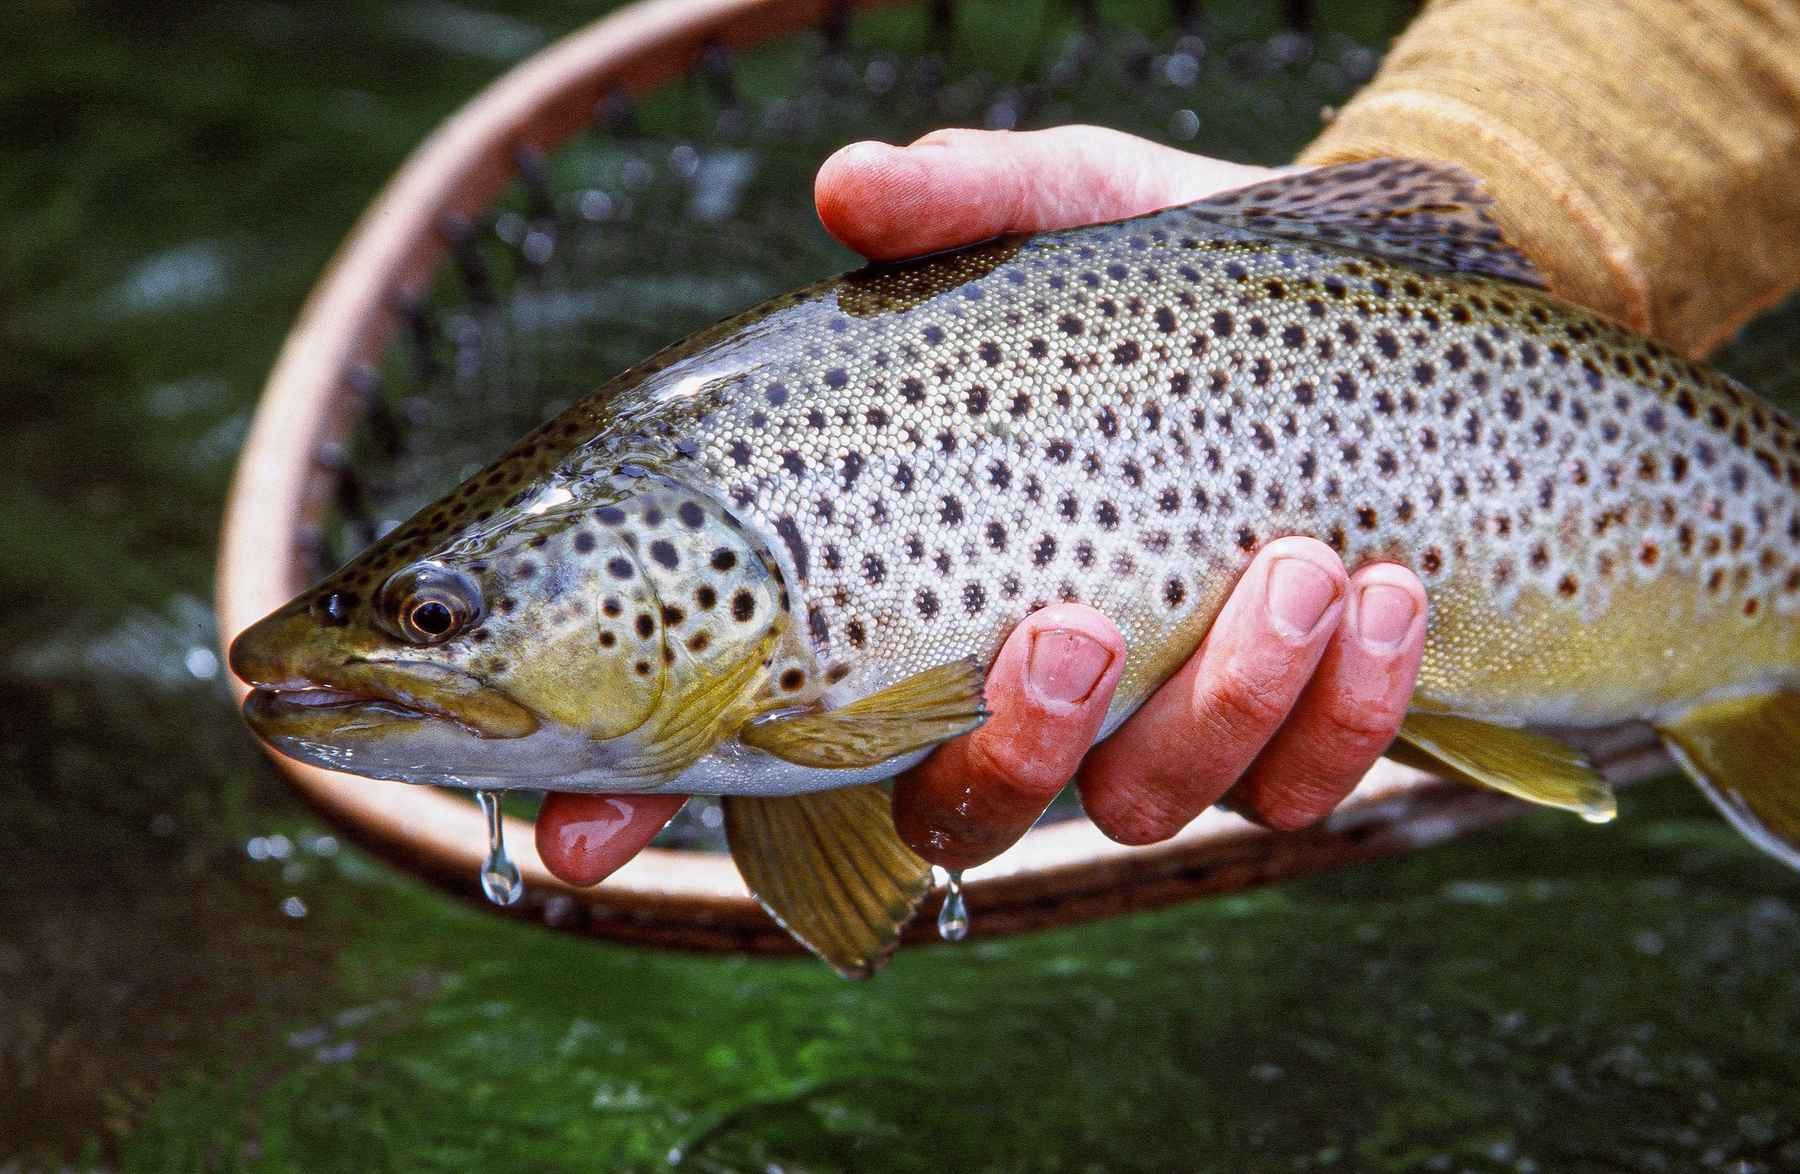 http://www.hatchmag.com/sites/default/files/styles/extra-large/public/field/image/14330015.jpg